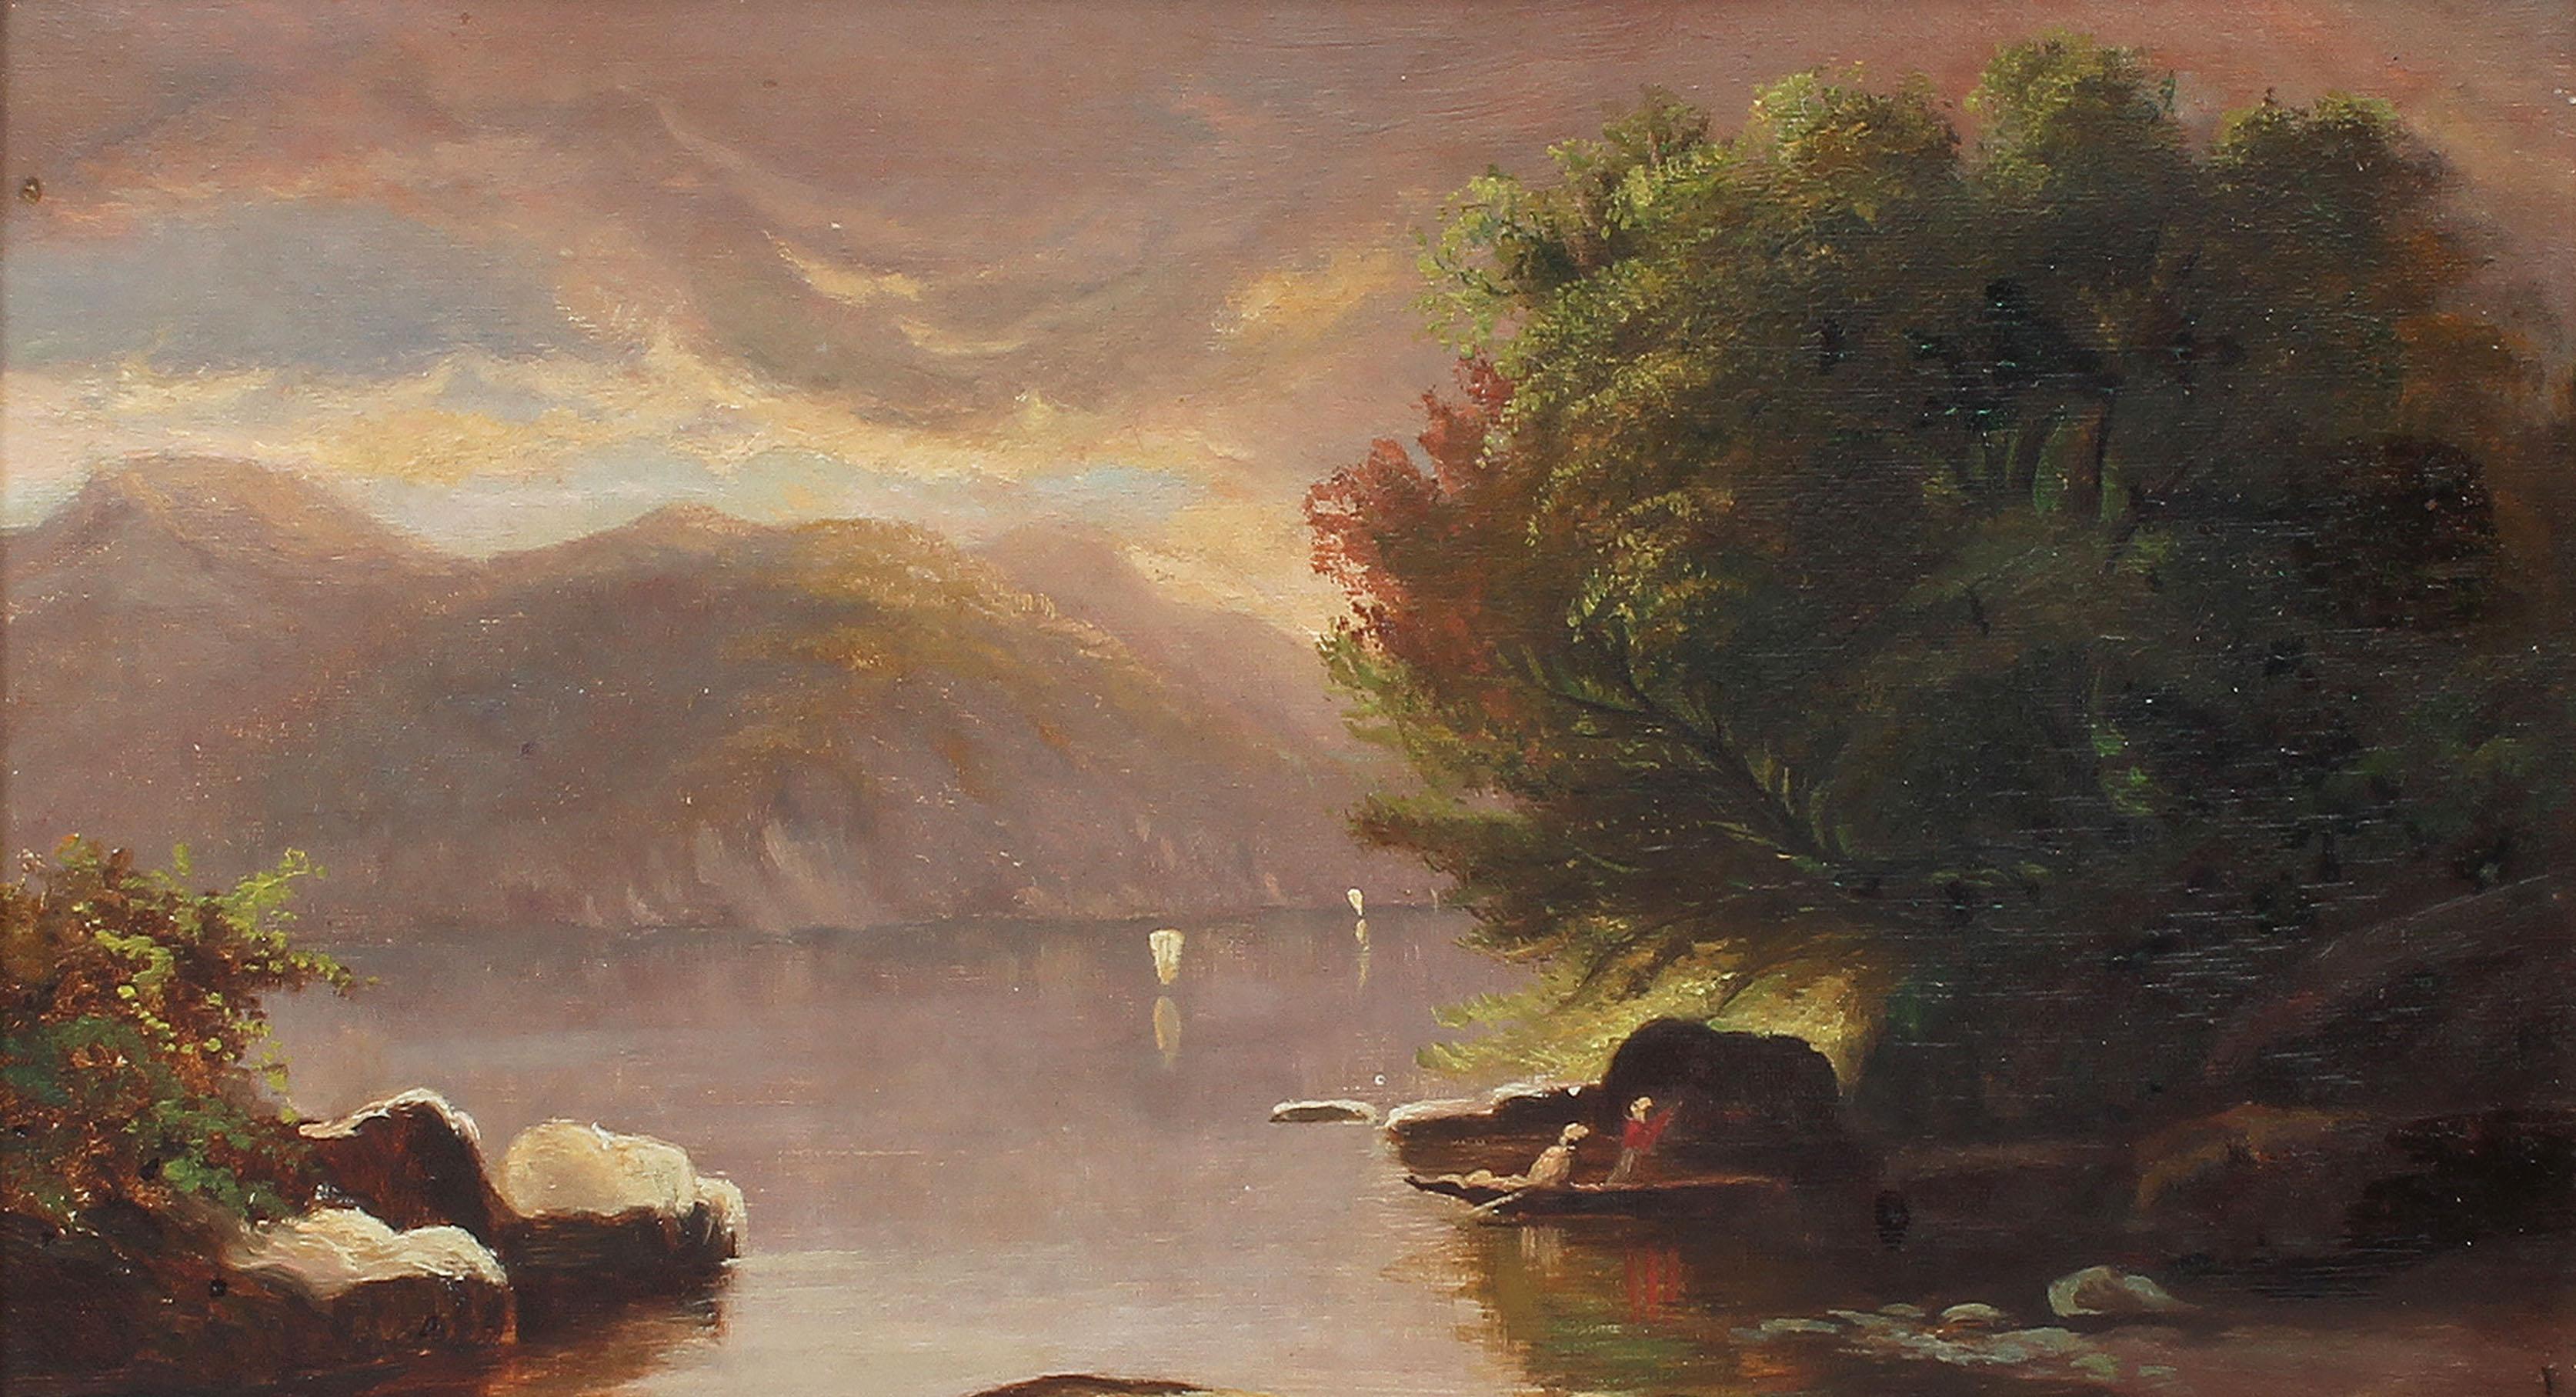 Antique Hudson River School luminous sunset stormy landscape painting.  Oil on canvas, circa 1870.  Unsigned.  Displayed in a period giltwood fluted cove frame.  Image size, 12